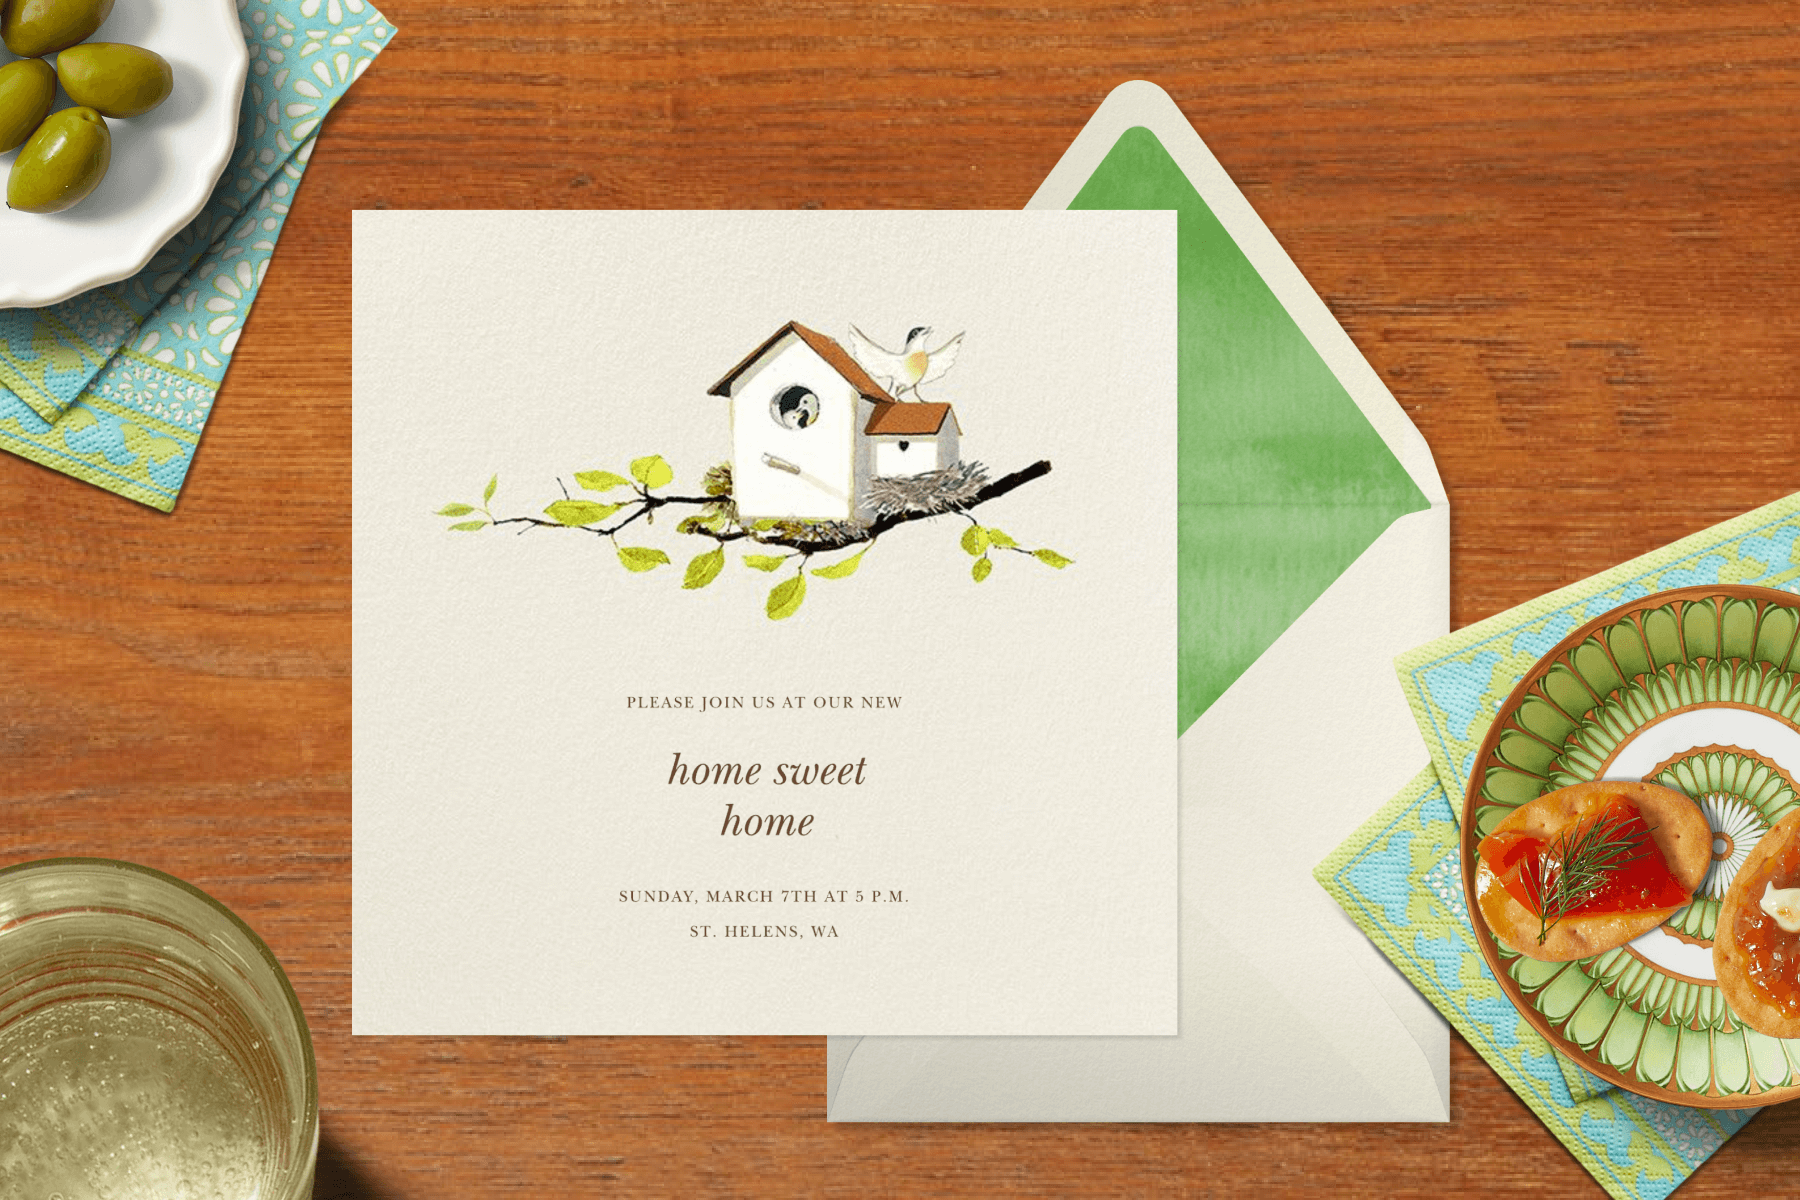 A square housewarming party invitation reads “home sweet home” with a watercolor painting of birds in a birdhouse on a branch with another bird spreading its wings on the roof. Around the card on a wood backdrop are small plates with hors d'oeuvres, a bottle of wine, and a drinking glass